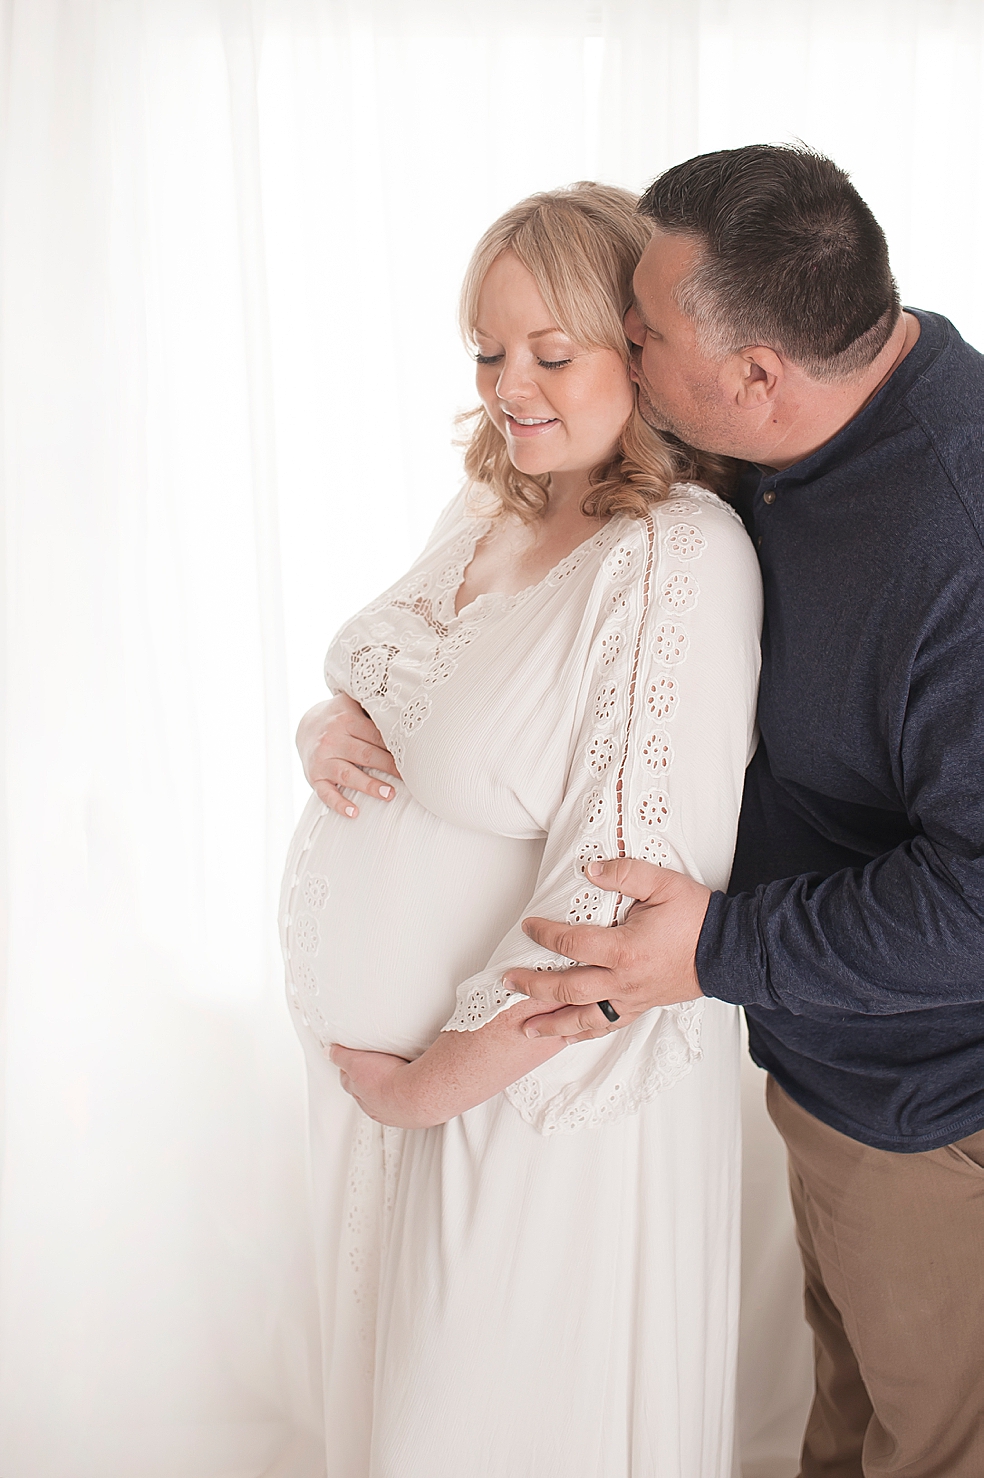 Mom and dad snuggling in the studio | Photo by Decatur Alabama Maternity Photographer Jessica Lee